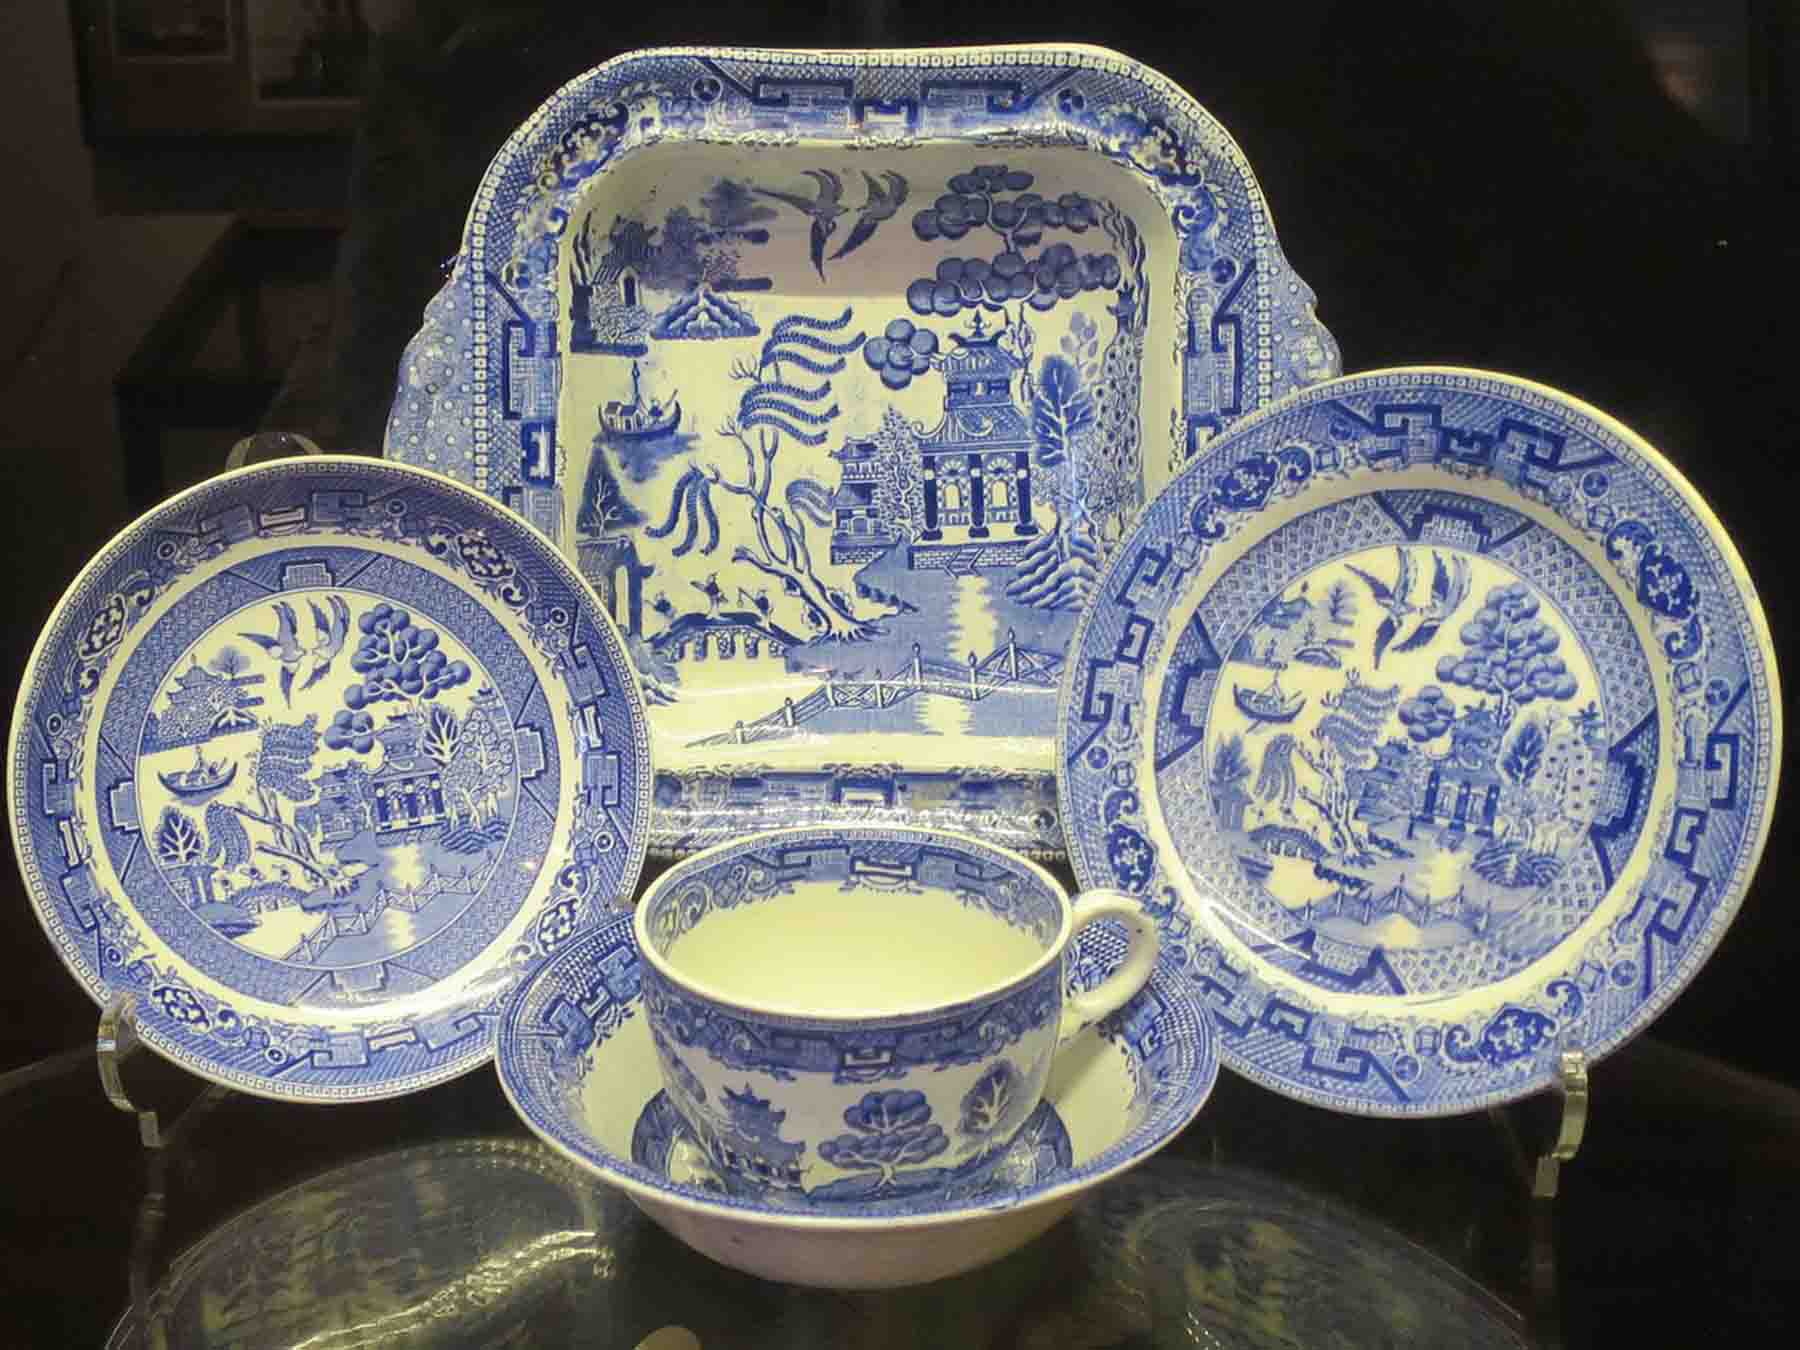 Most Valuable Antique Dishes - Get All You Need